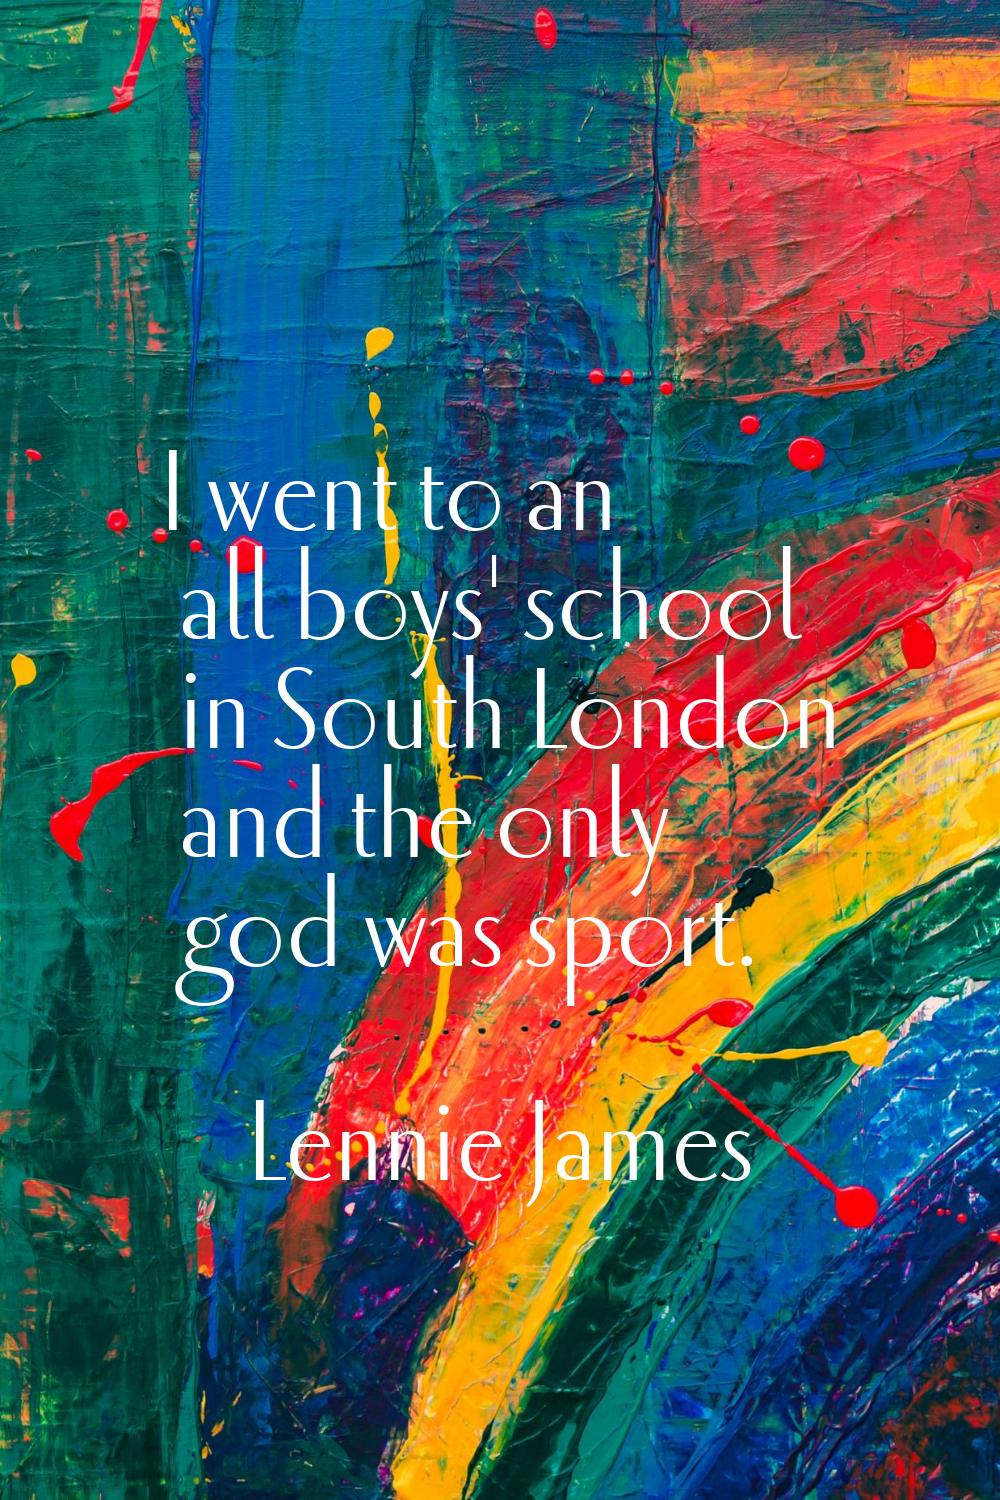 I went to an all boys' school in South London and the only god was sport.